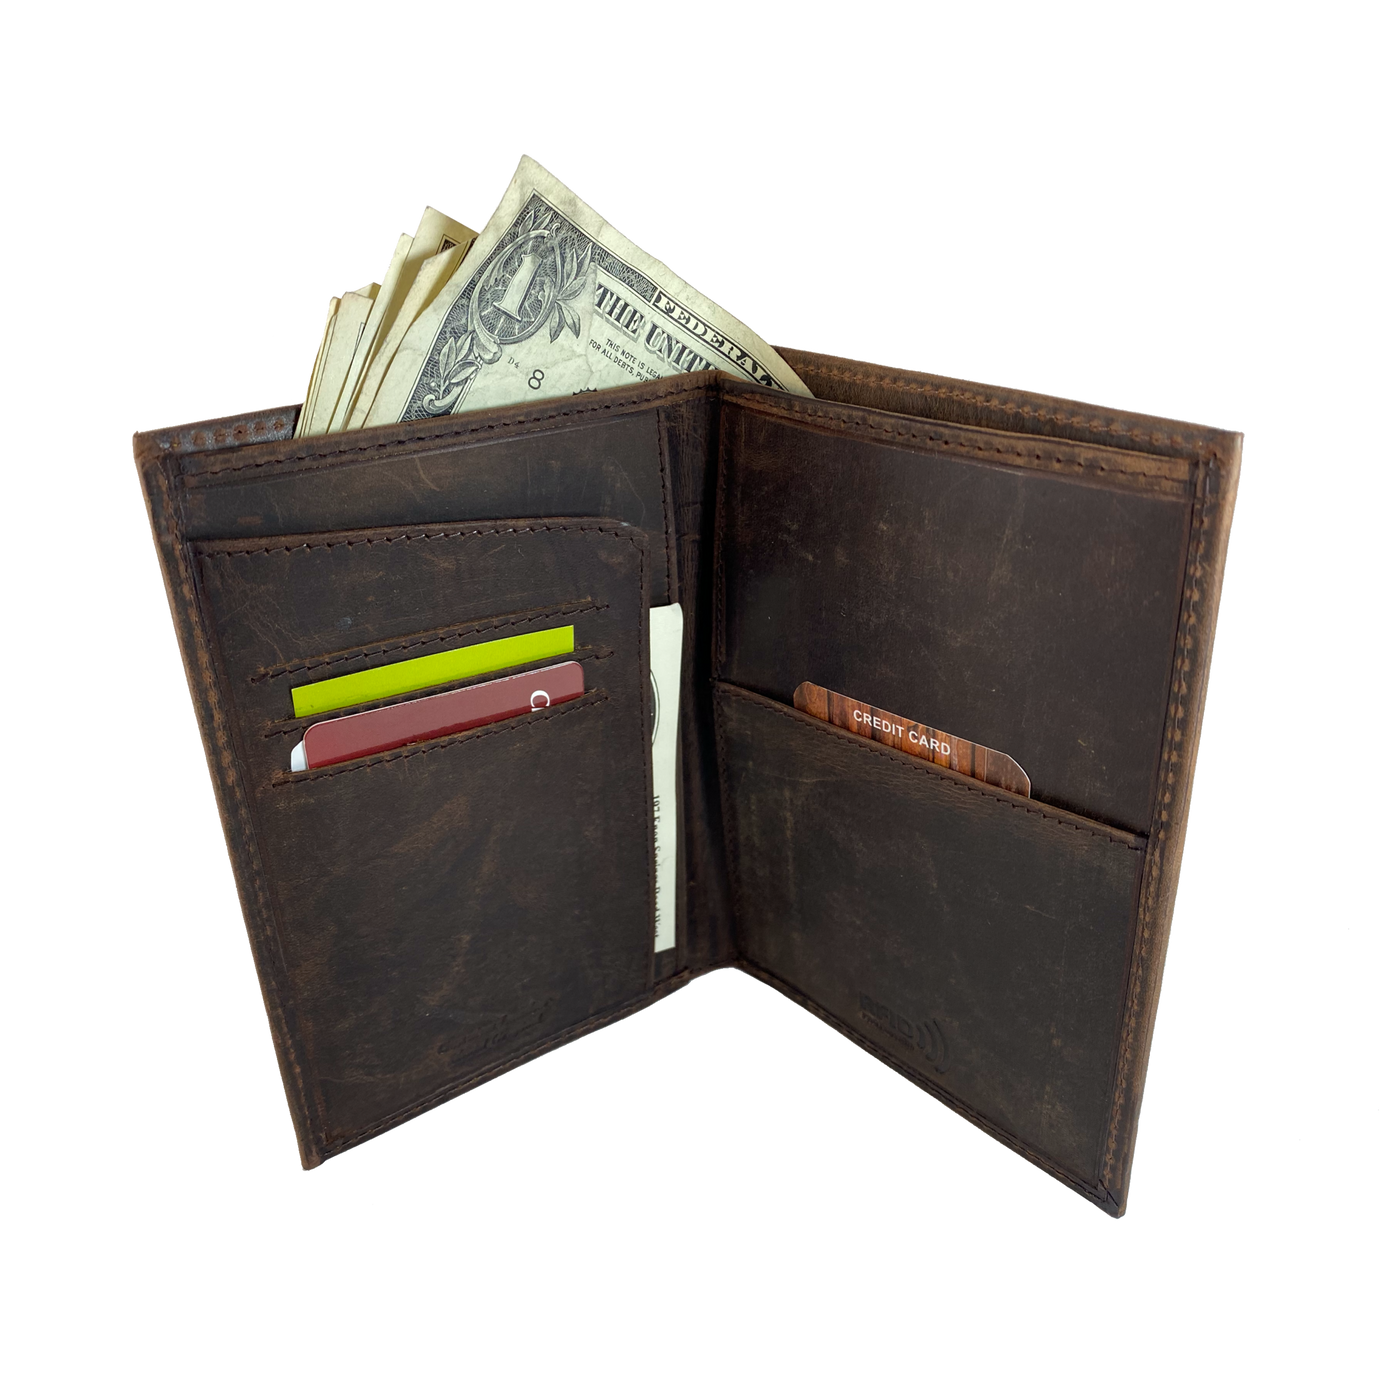 Leather Bi-Fold Passport/Wallet with three card slots, two inside pockets, passport slot and a cash pocket. A convenient way to keep everything you need in one place! Imported and Buckle and Hide Approved! Great for men or women!